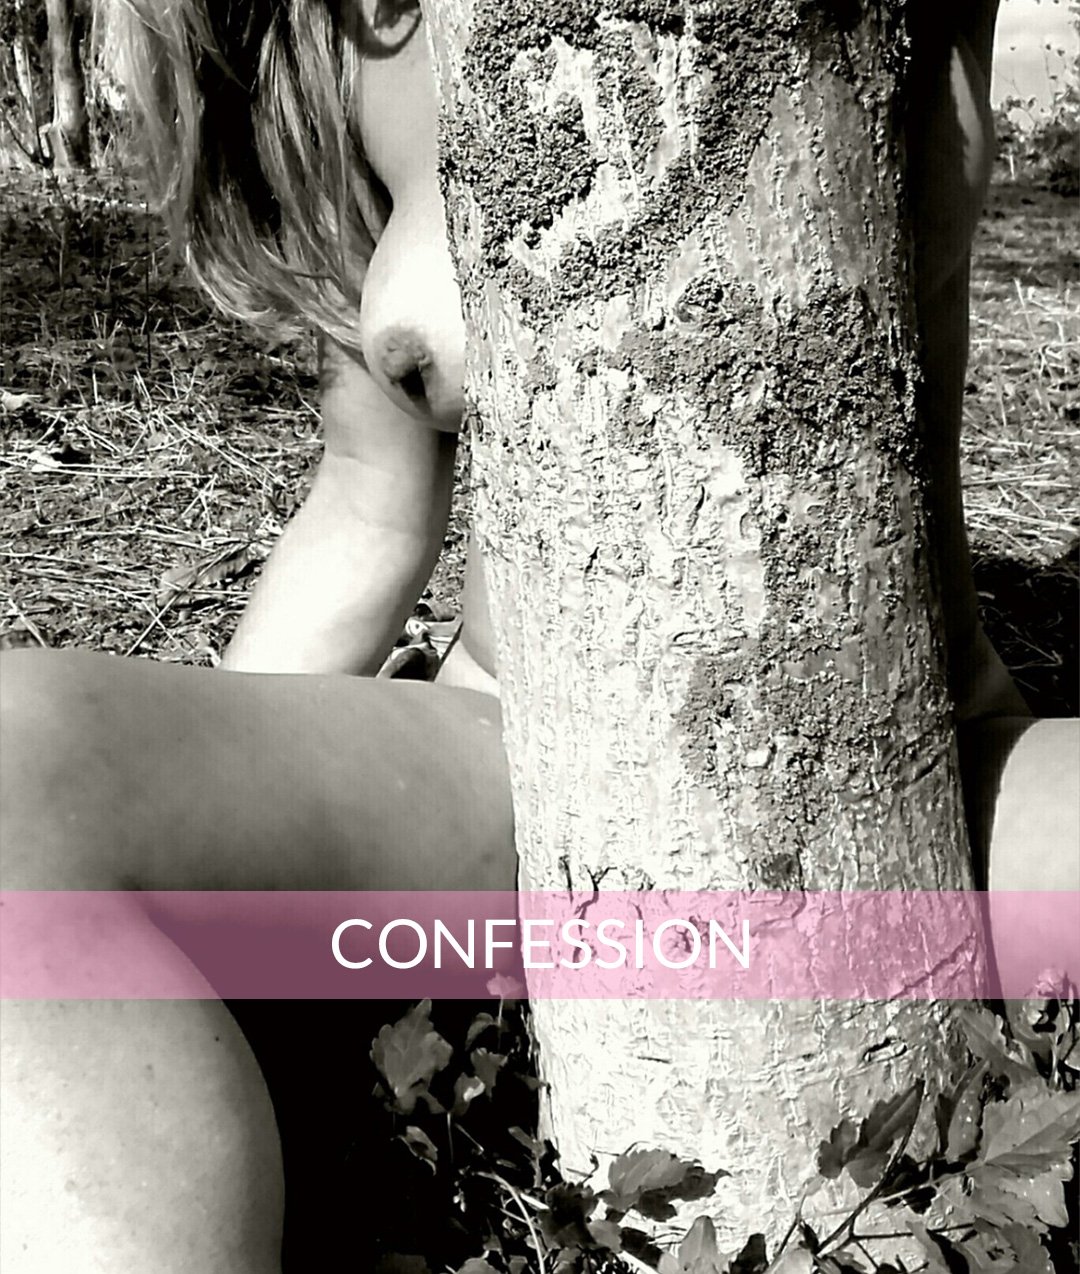 My readers real sex story confessions from couples and women